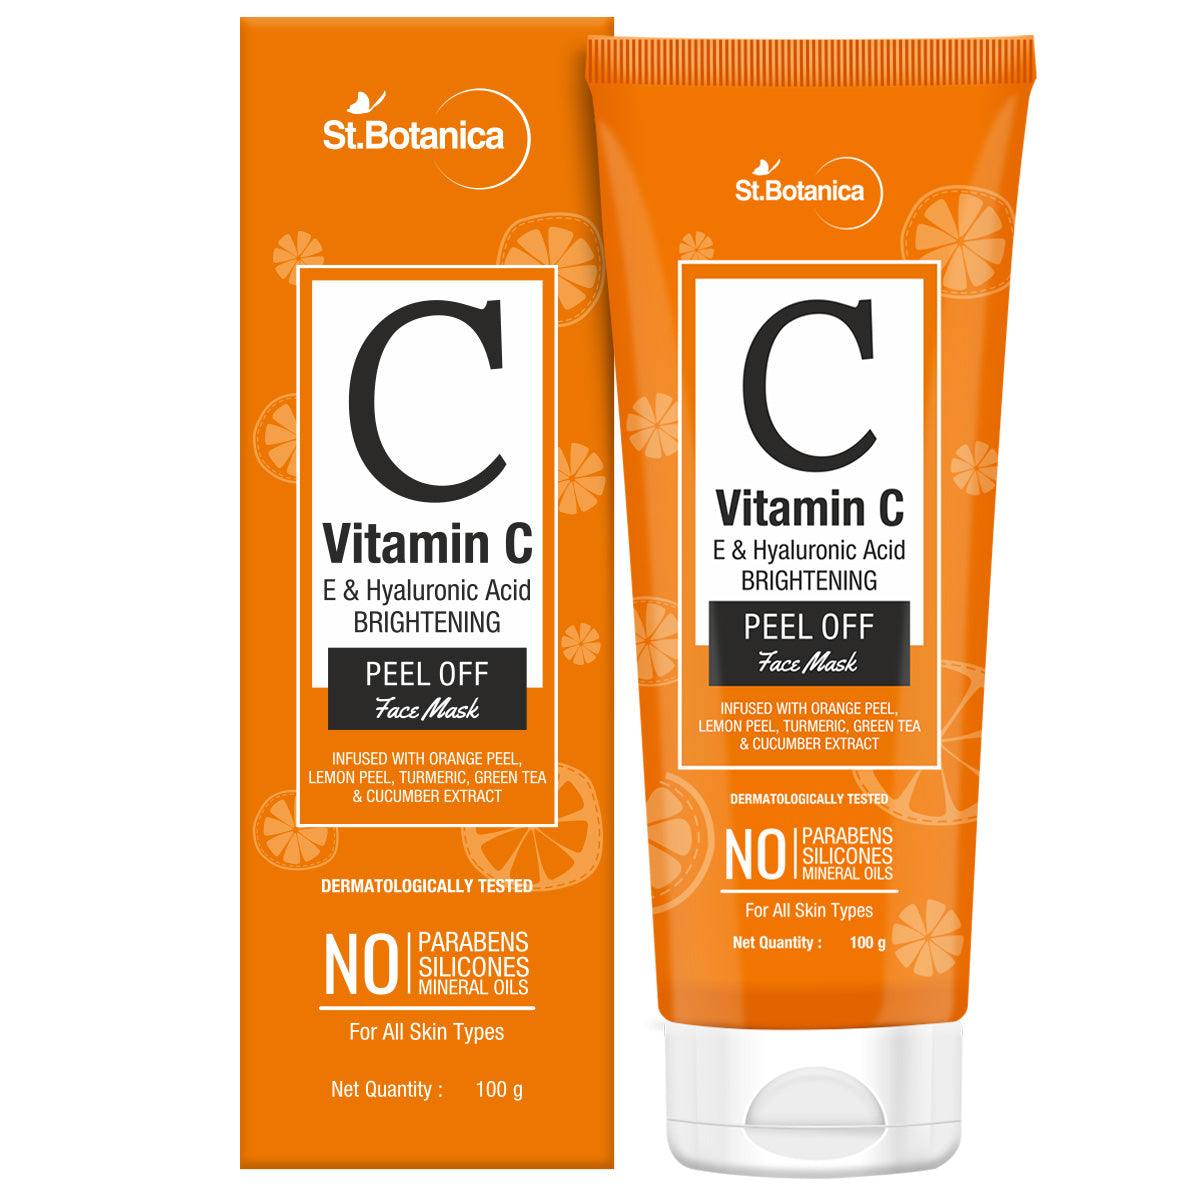 St.Botanica Vitamin C Brightening Peel Off Mask For Dark Spots, Clear and Radiant Complexion - No Parabens, Sulphate, Silicones, 100 ml